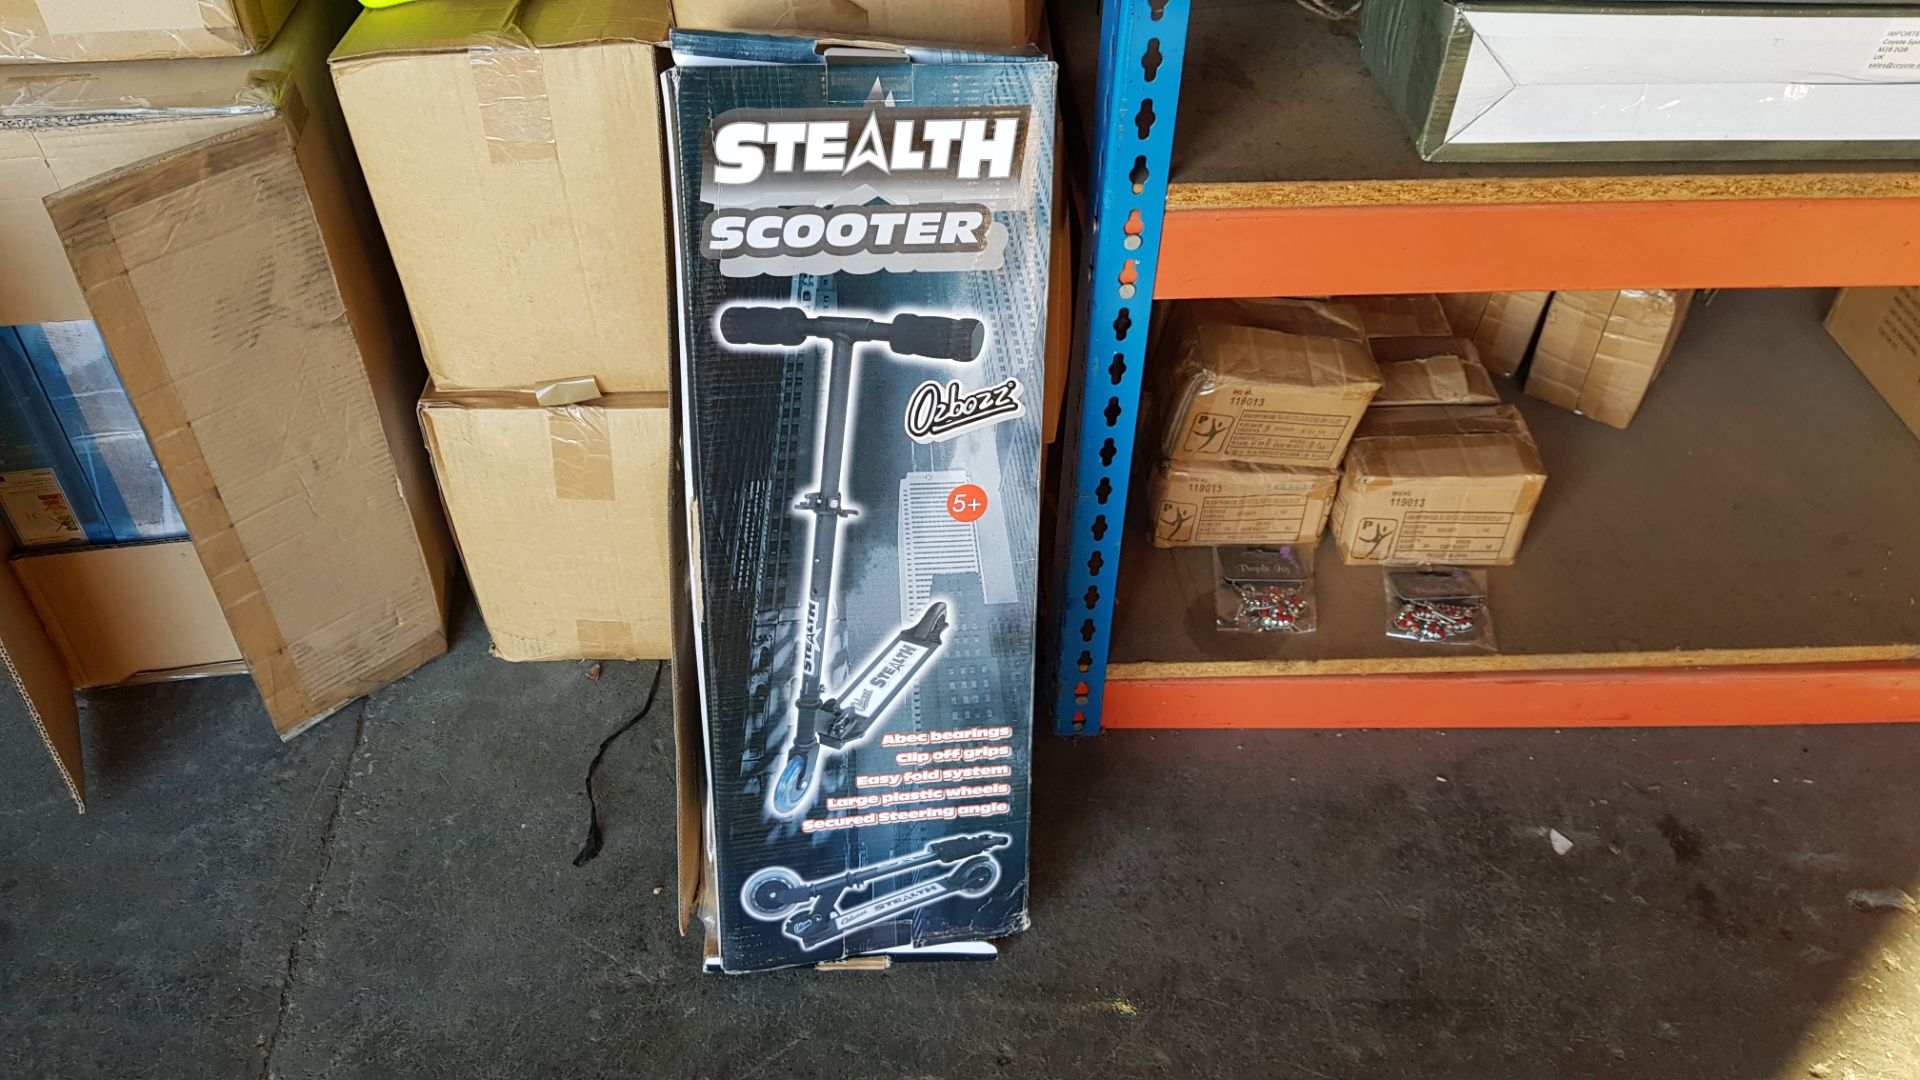 4 X OZBOZZ STEALTH SCOOTERS WITH 1 DAMAGED BOX